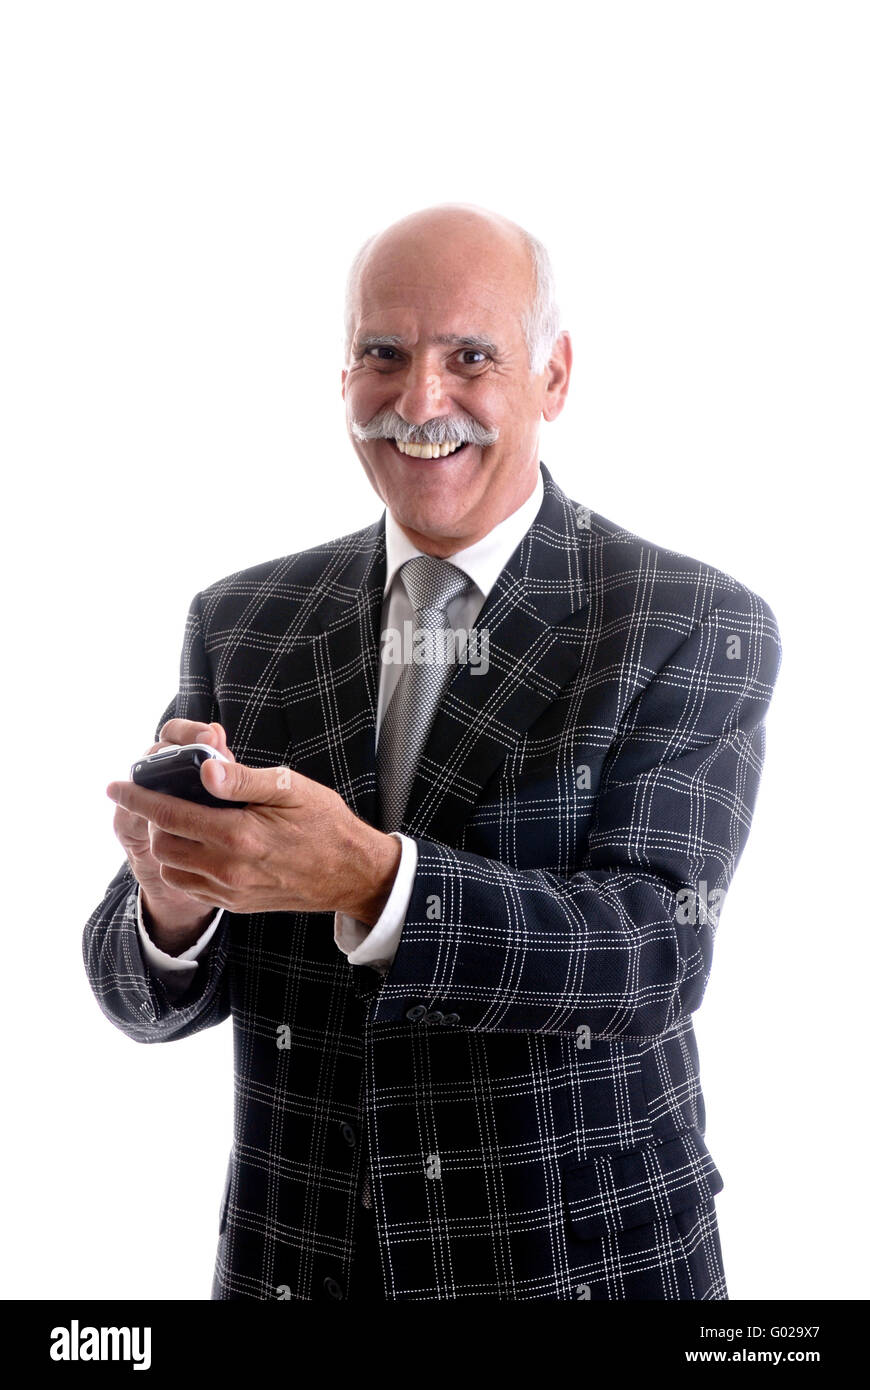 Successful Businessman with a calculator in his hand Stock Photo